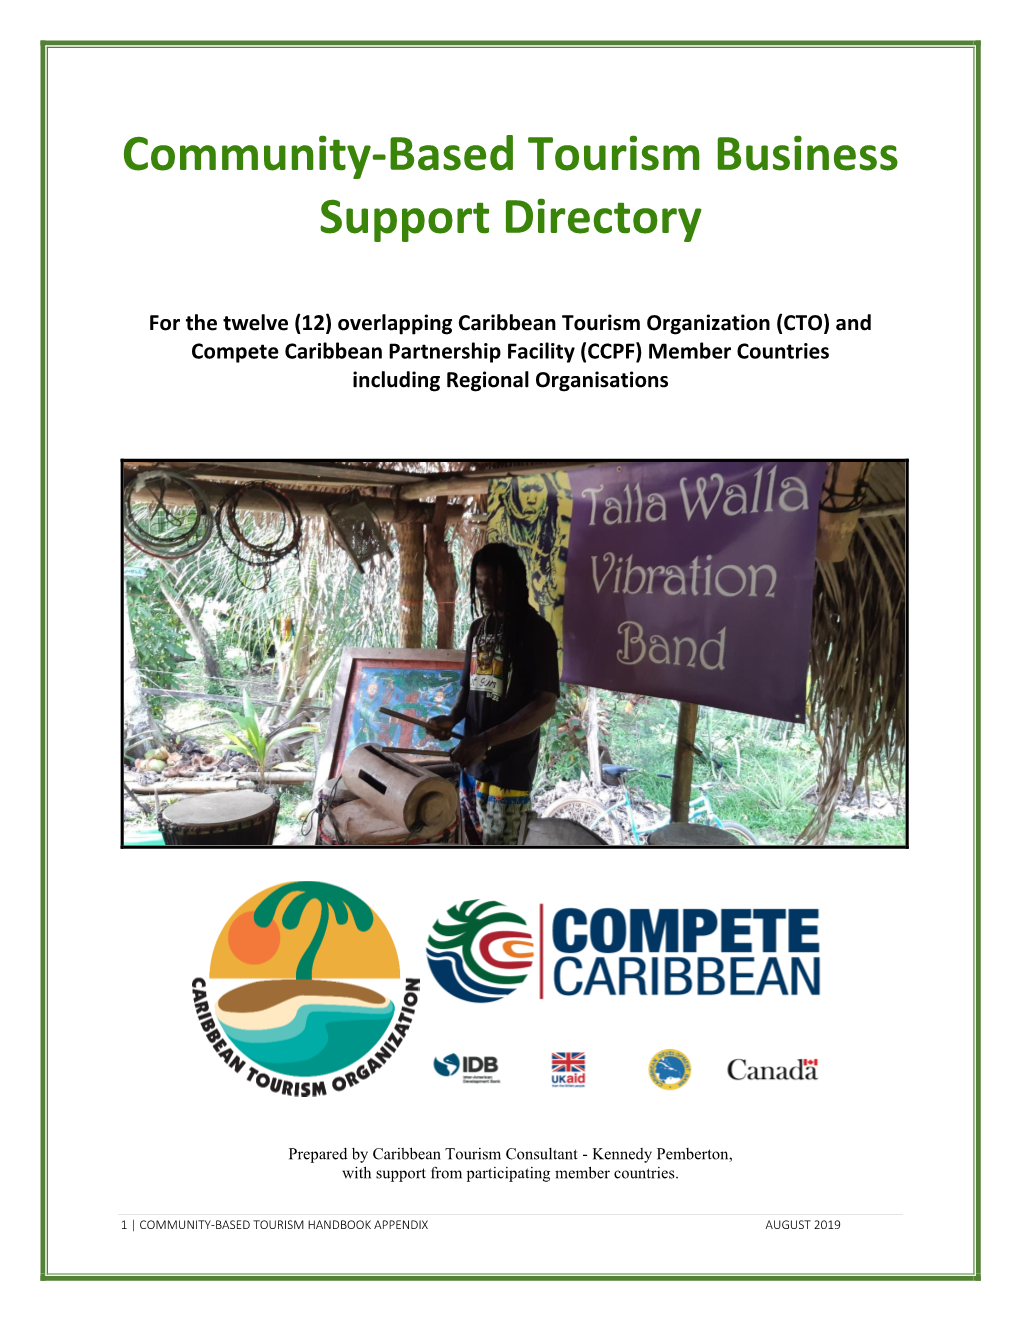 Community-Based Tourism Business Support Directory